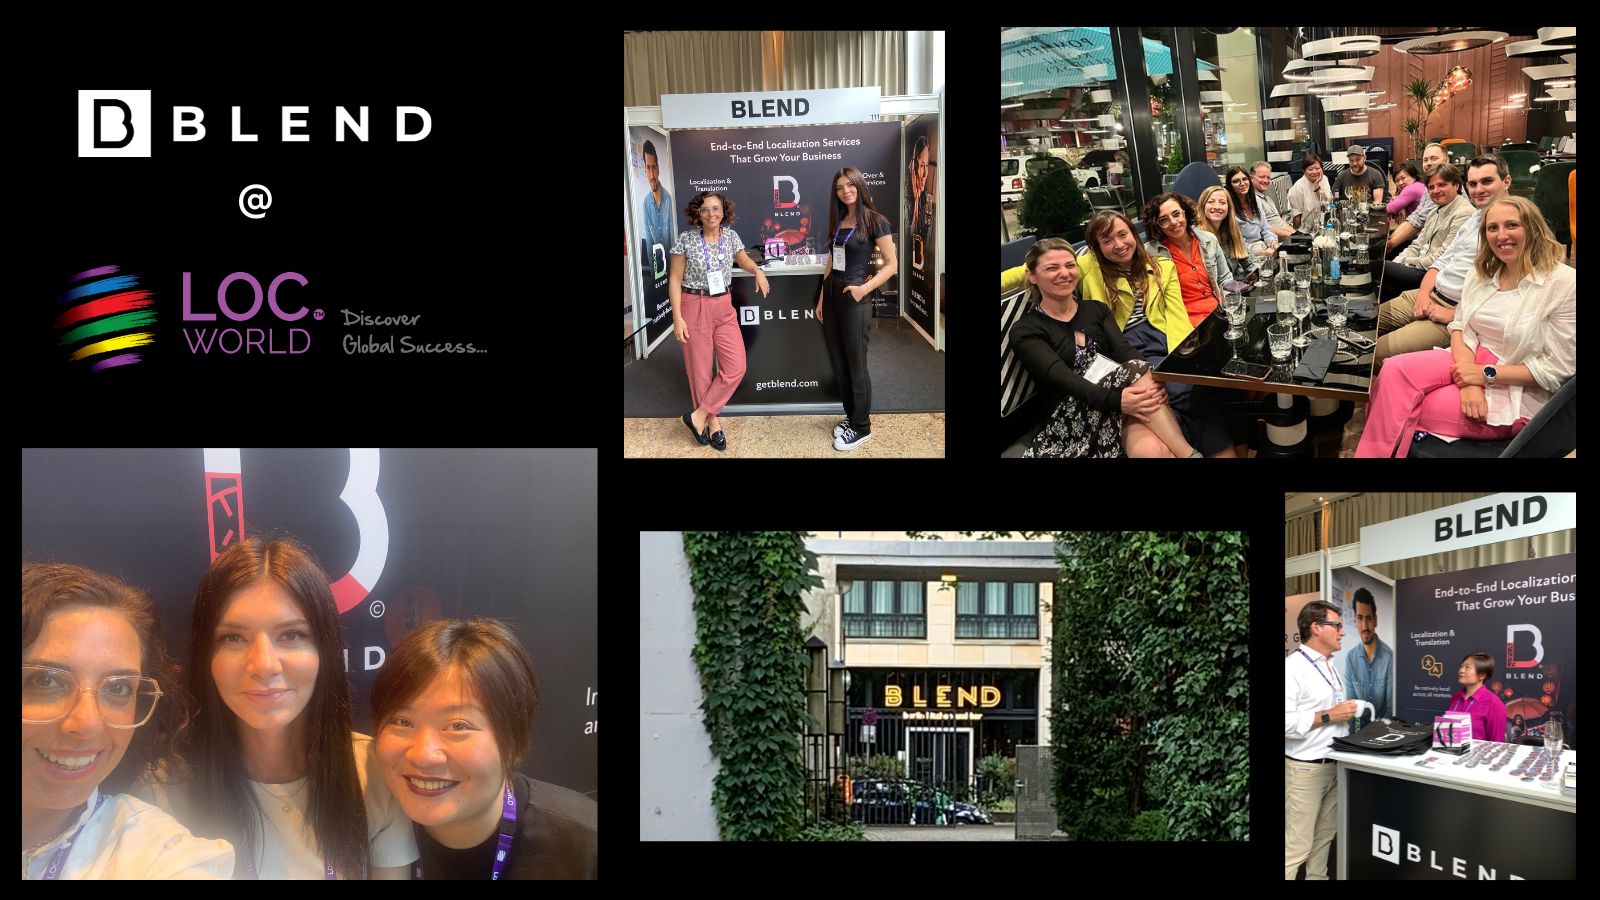 BLEND Takes One-Stop Localization & Voice to LocWorld Berlin